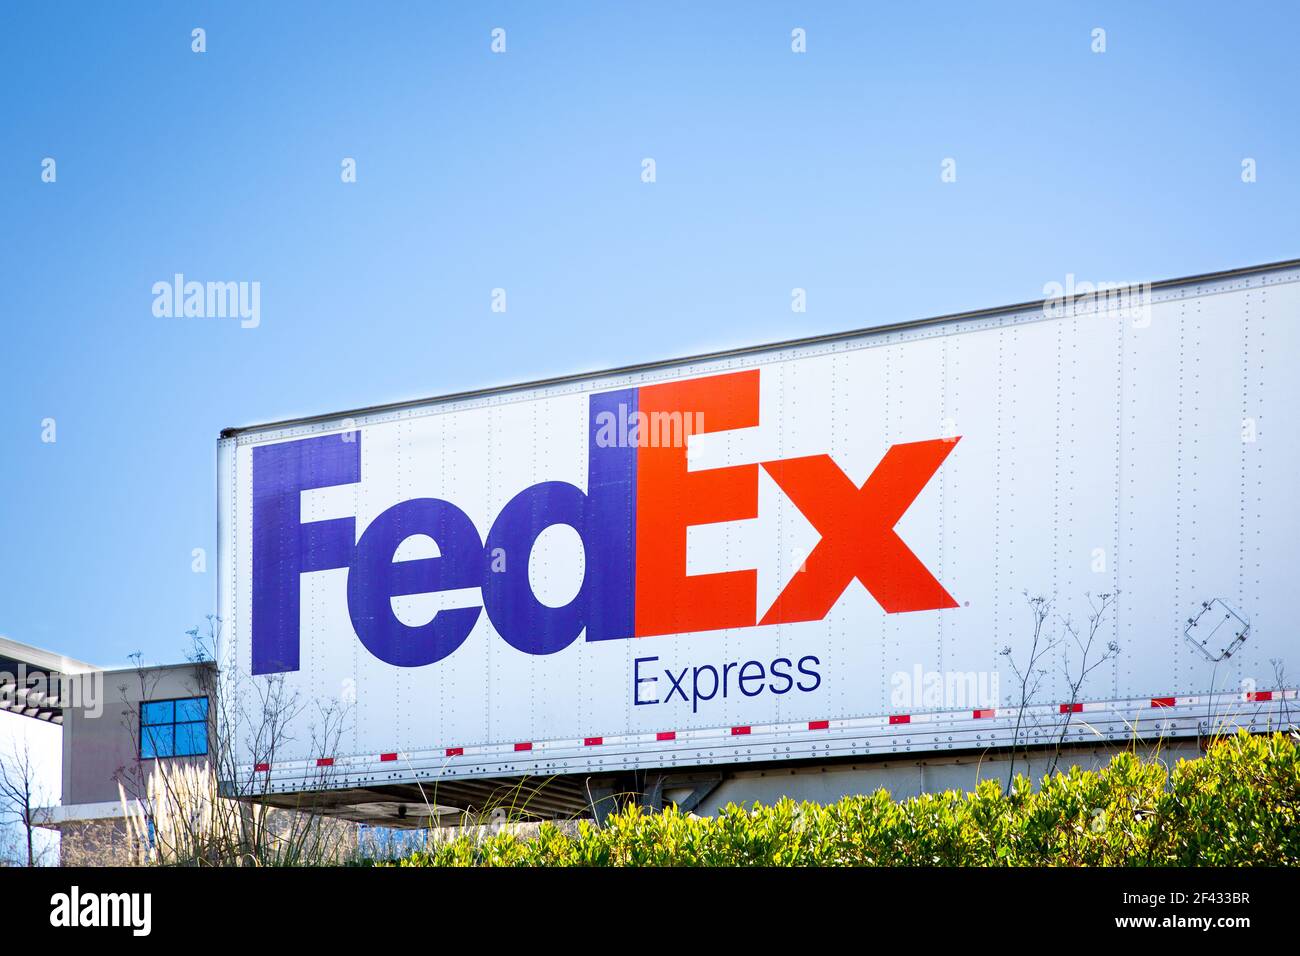 South San Francisco, CA, USA - February 24, 2021: Closeup of a Fedex container. FedEx Corporation is an American multinational delivery services compa Stock Photo